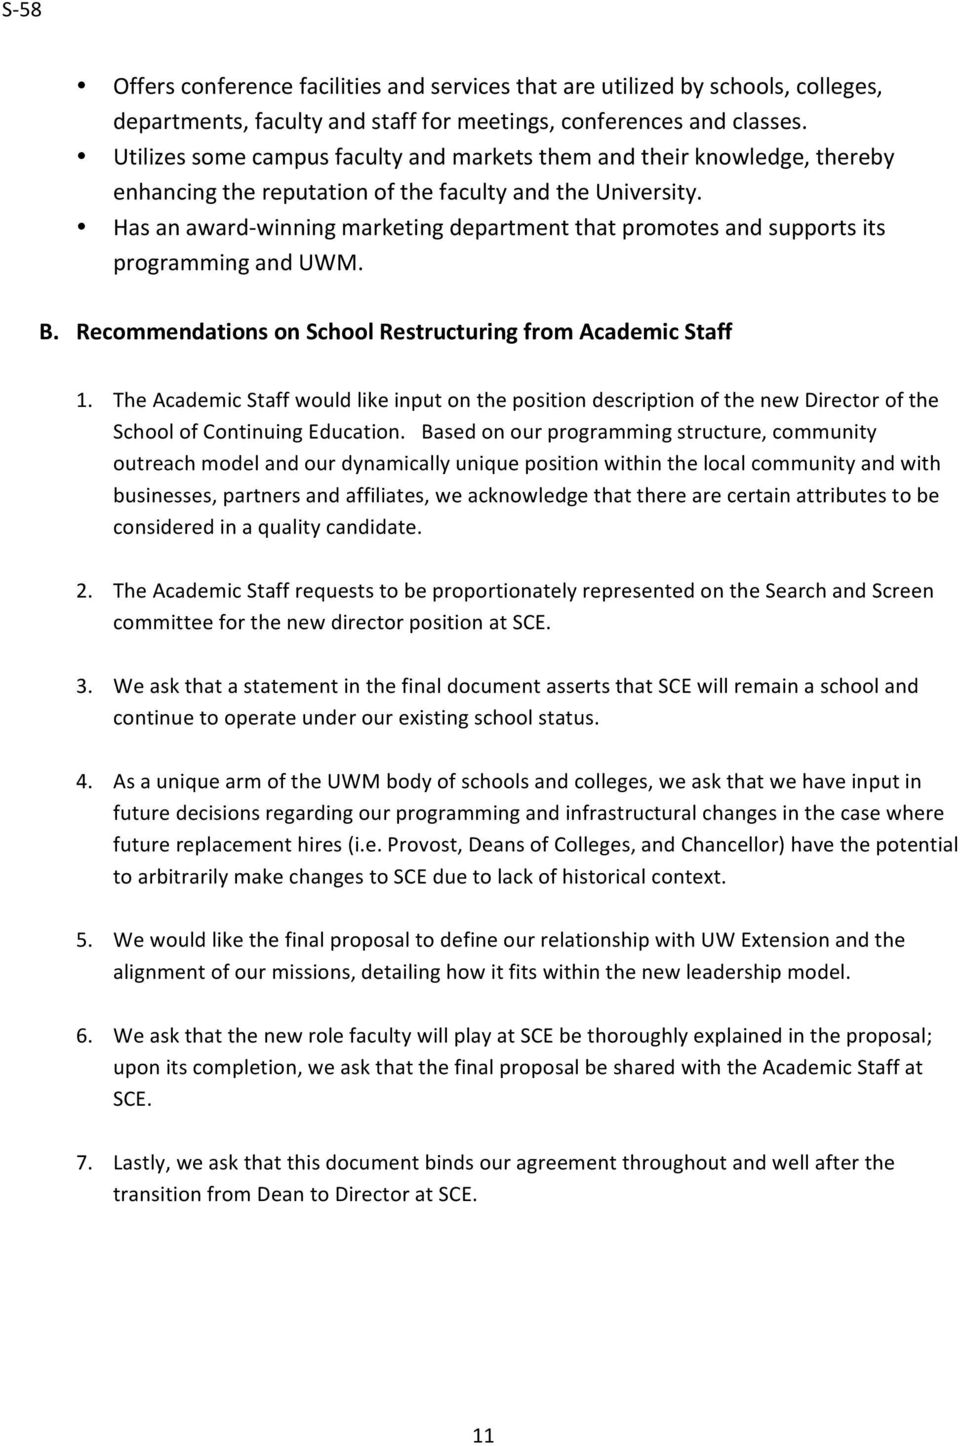 Has an award- winning marketing department that promotes and supports its programming and UWM. B. Recommendations on School Restructuring from Academic Staff 1.